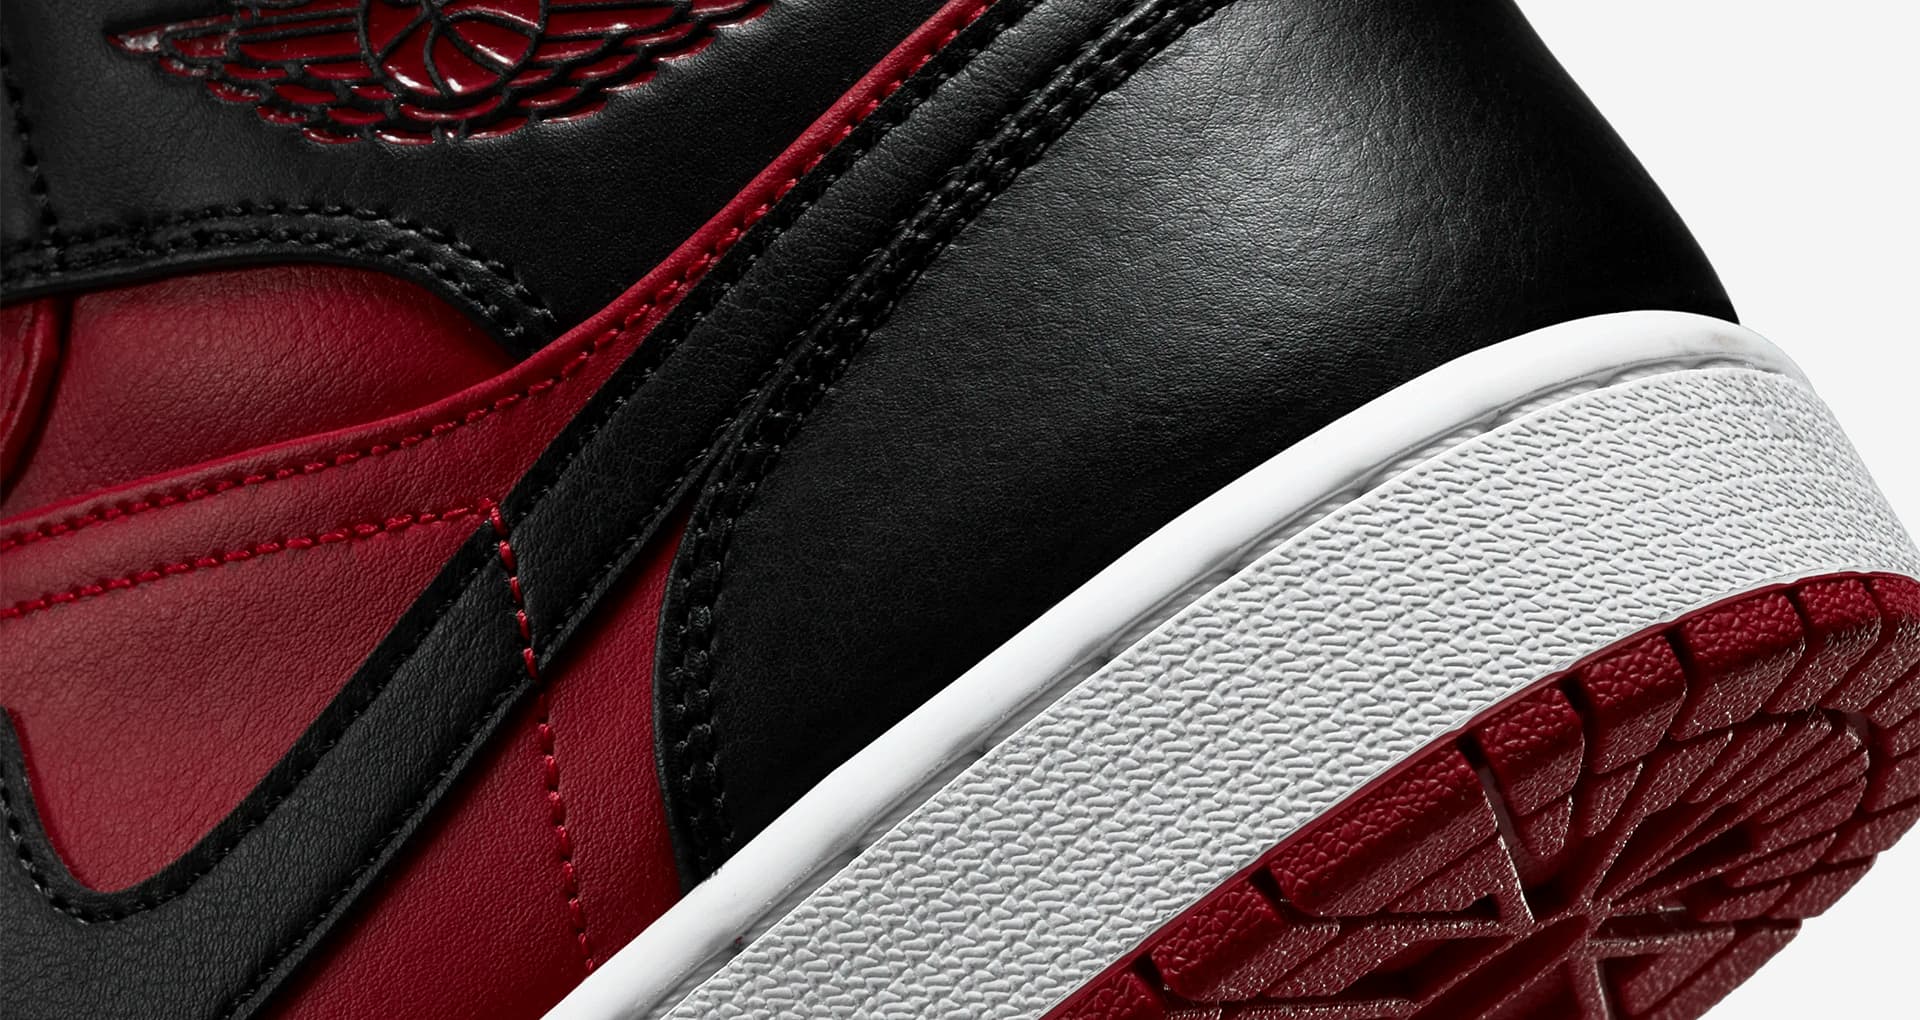 Air Jordan 1 Mid 'Gym Red and Black' (554724-660) Release Date. Nike ...